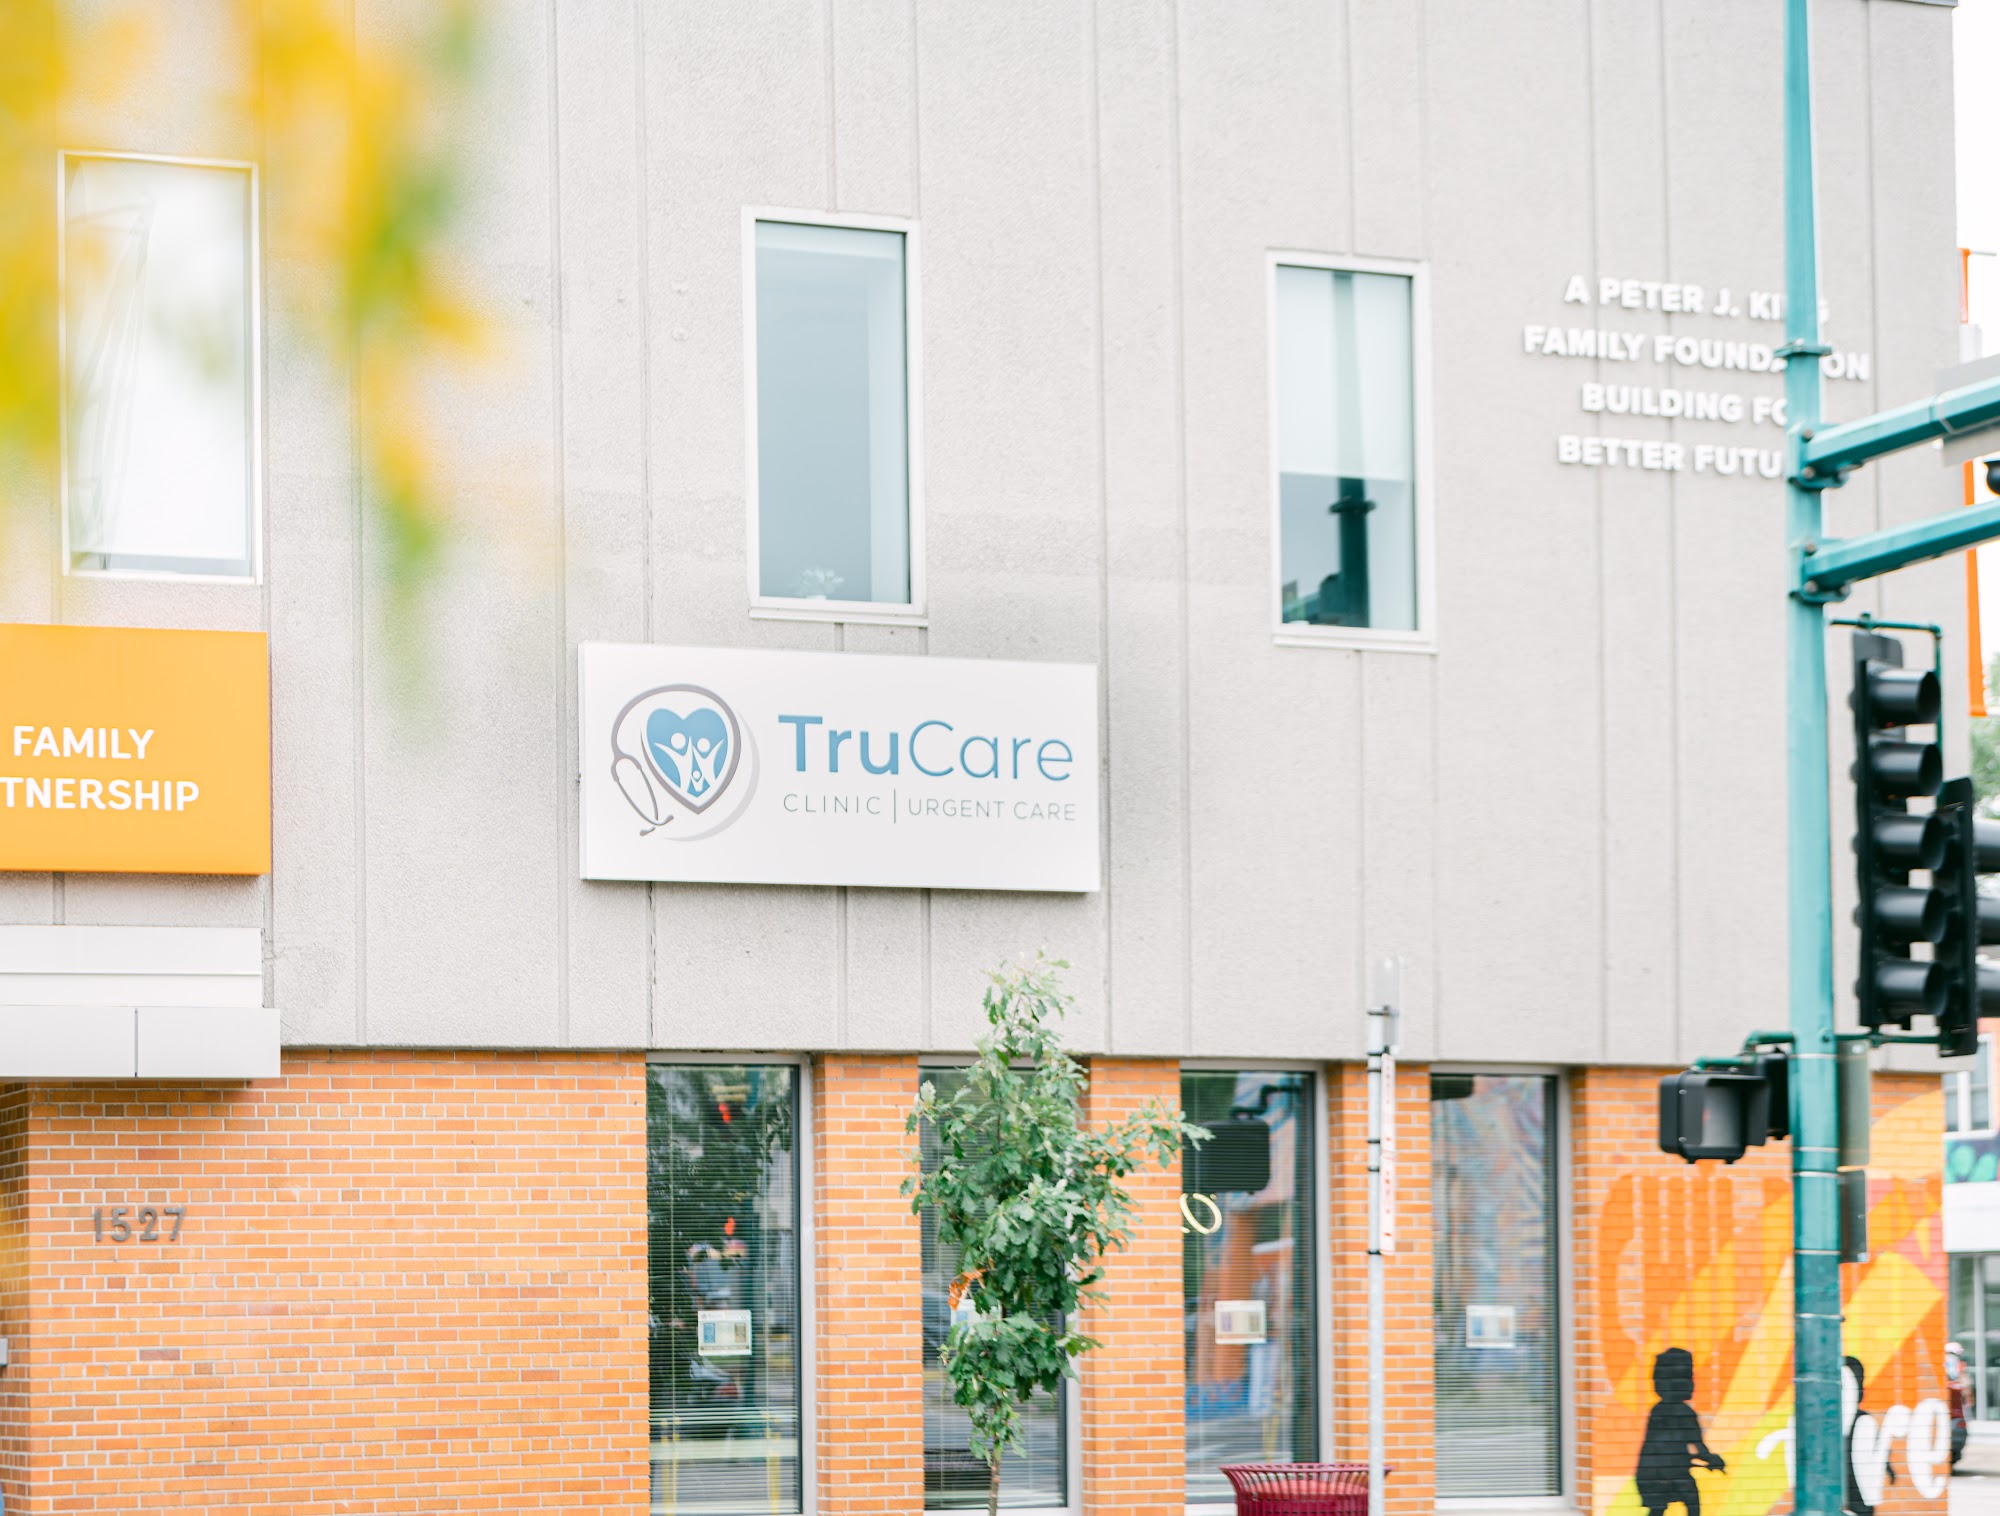 TruCare Clinic and Urgent Care